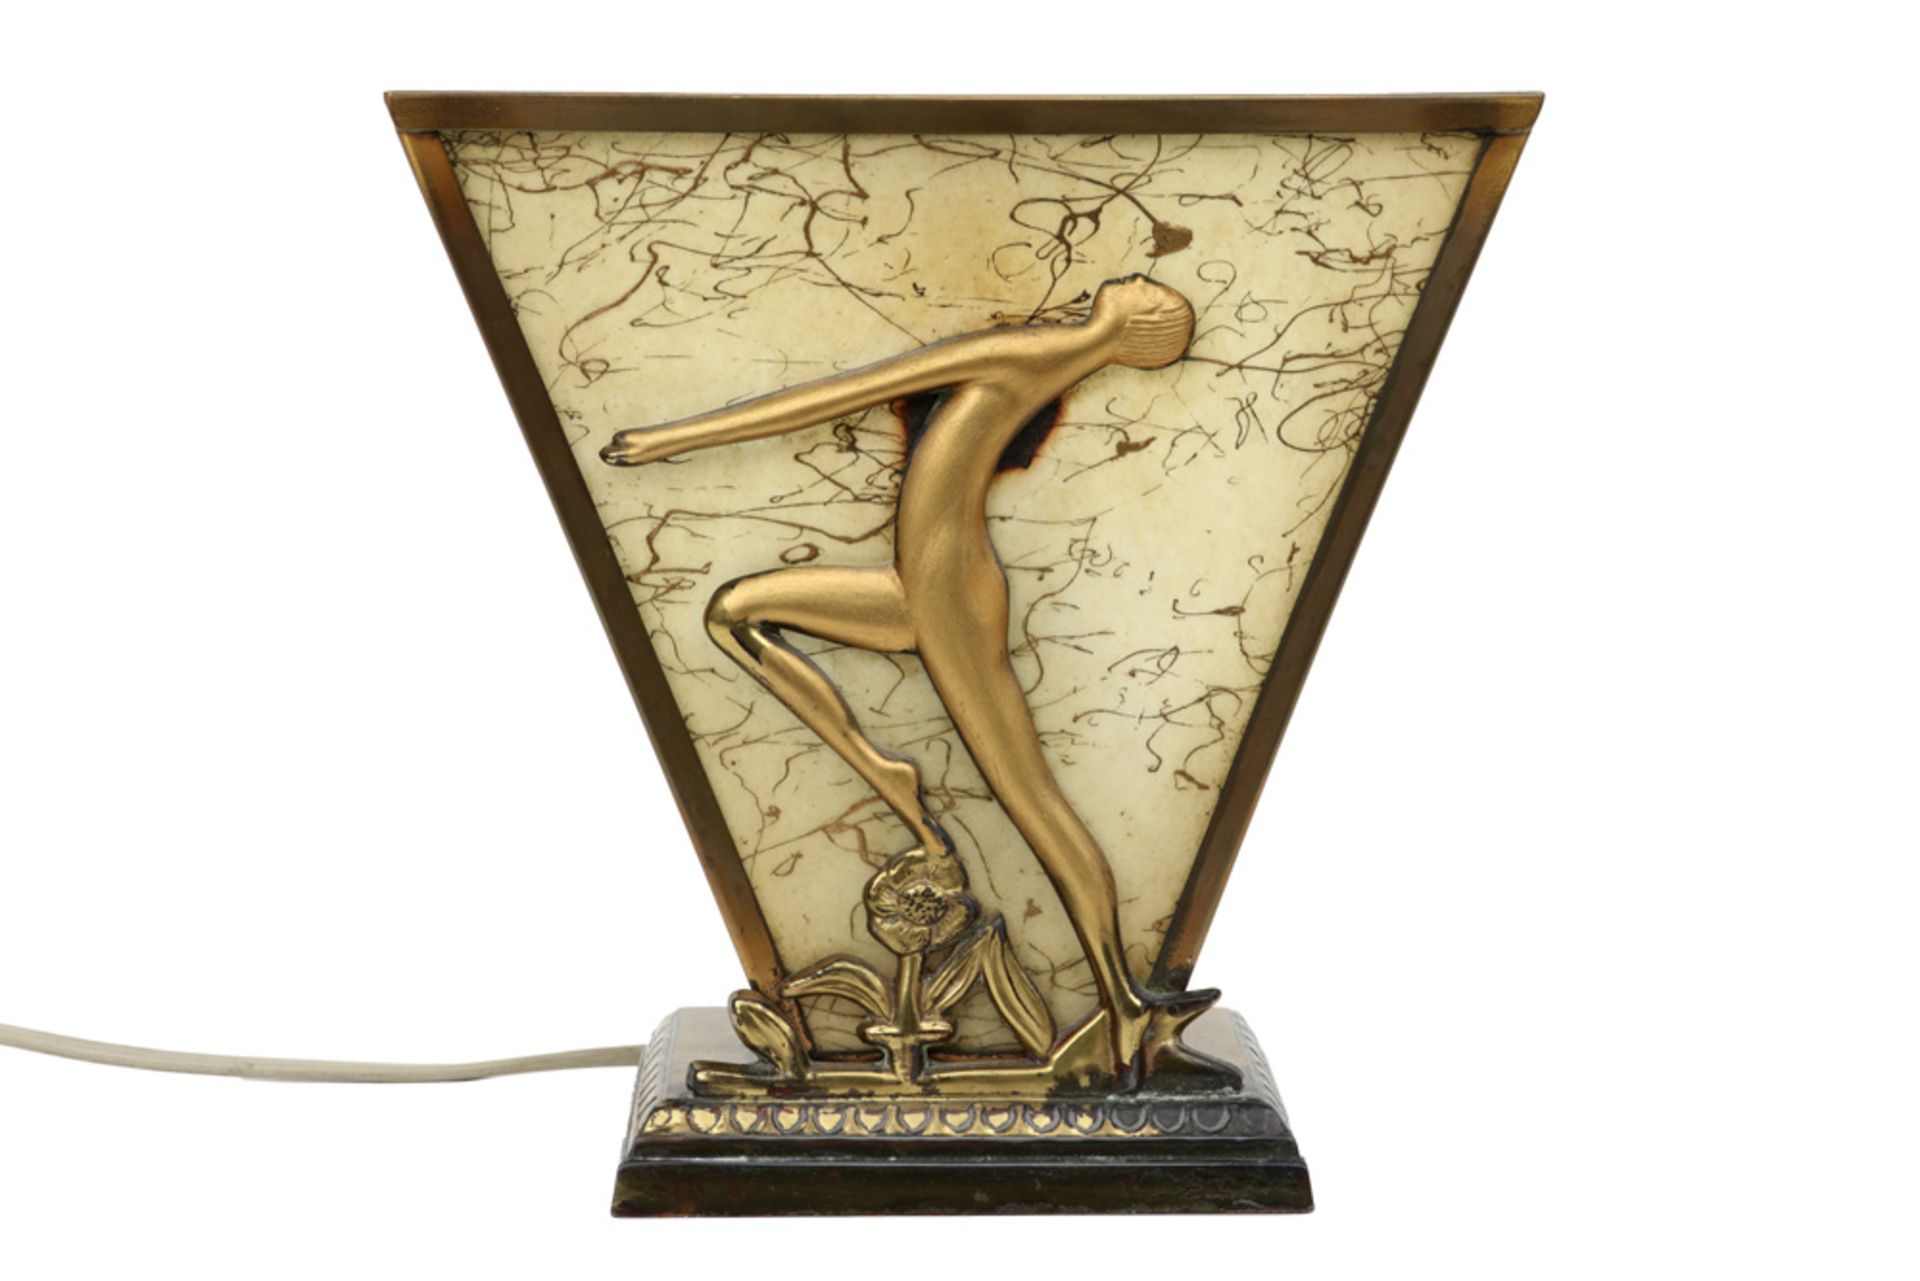 quite special triangular Art Deco lamp in silverplated and gilded metal & with parchment (?) ||